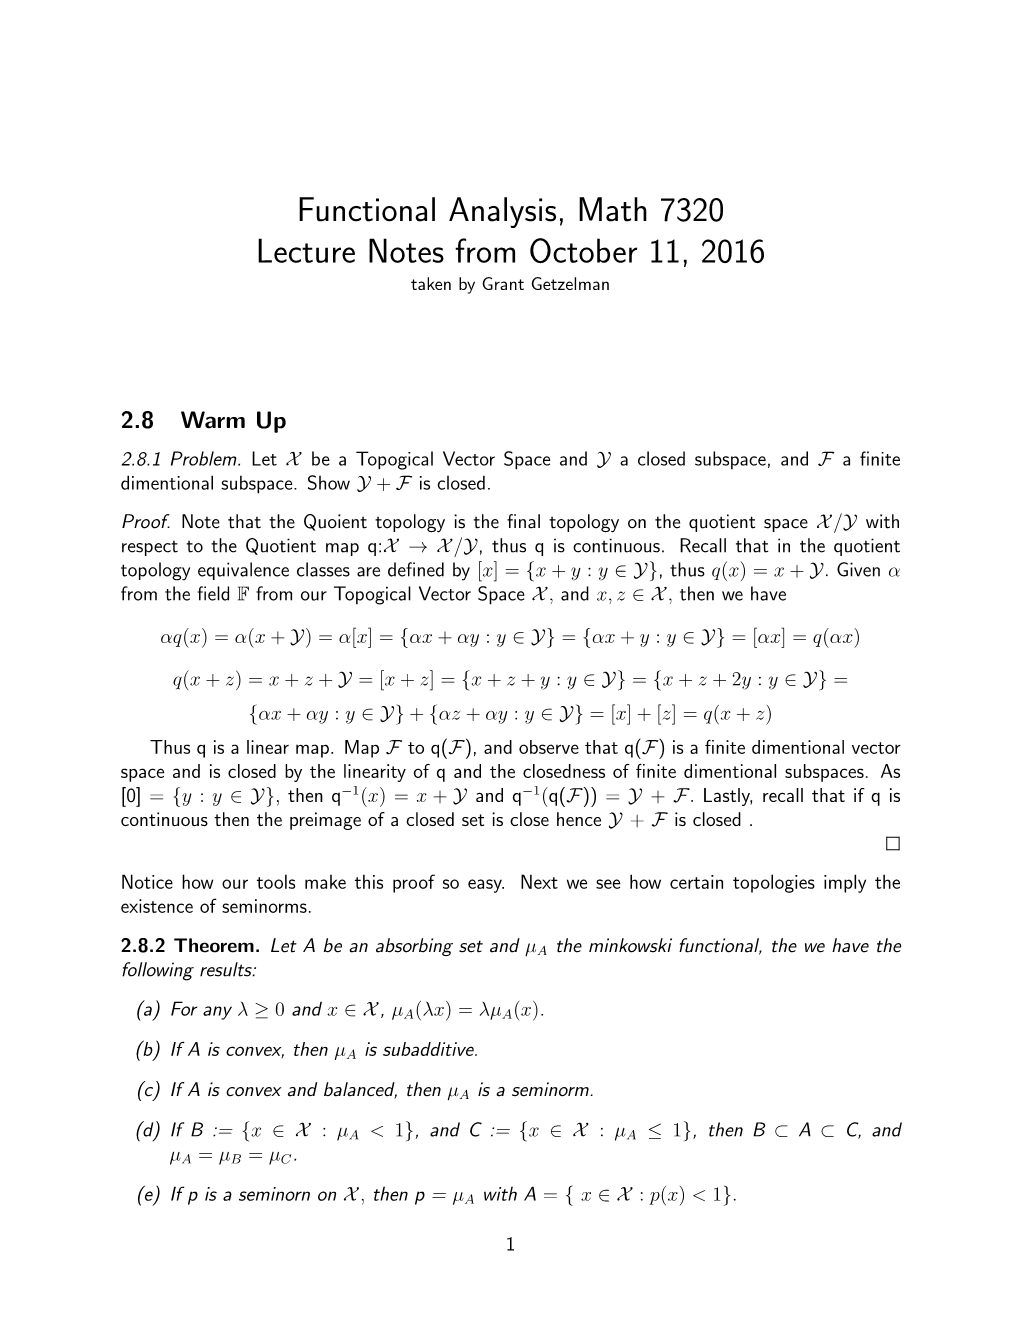 Functional Analysis, Math 7320 Lecture Notes from October 11, 2016 Taken by Grant Getzelman